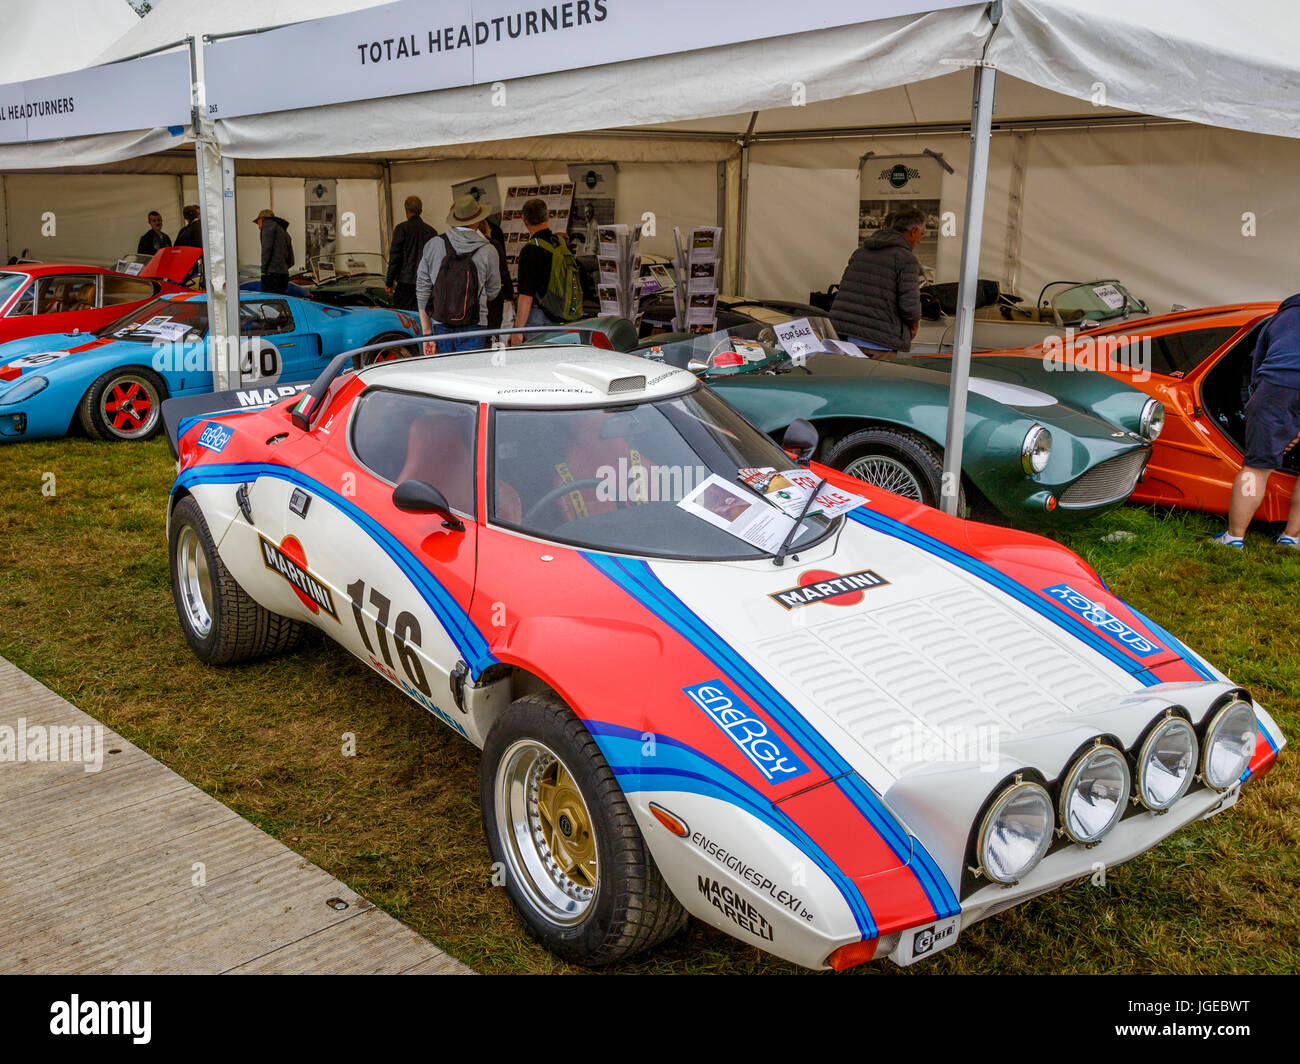 The Total Headturners stand at the 2017 Goodwood Festival of Speed, Sussex, UK. Retailing kit and replica cars. Stock Photo